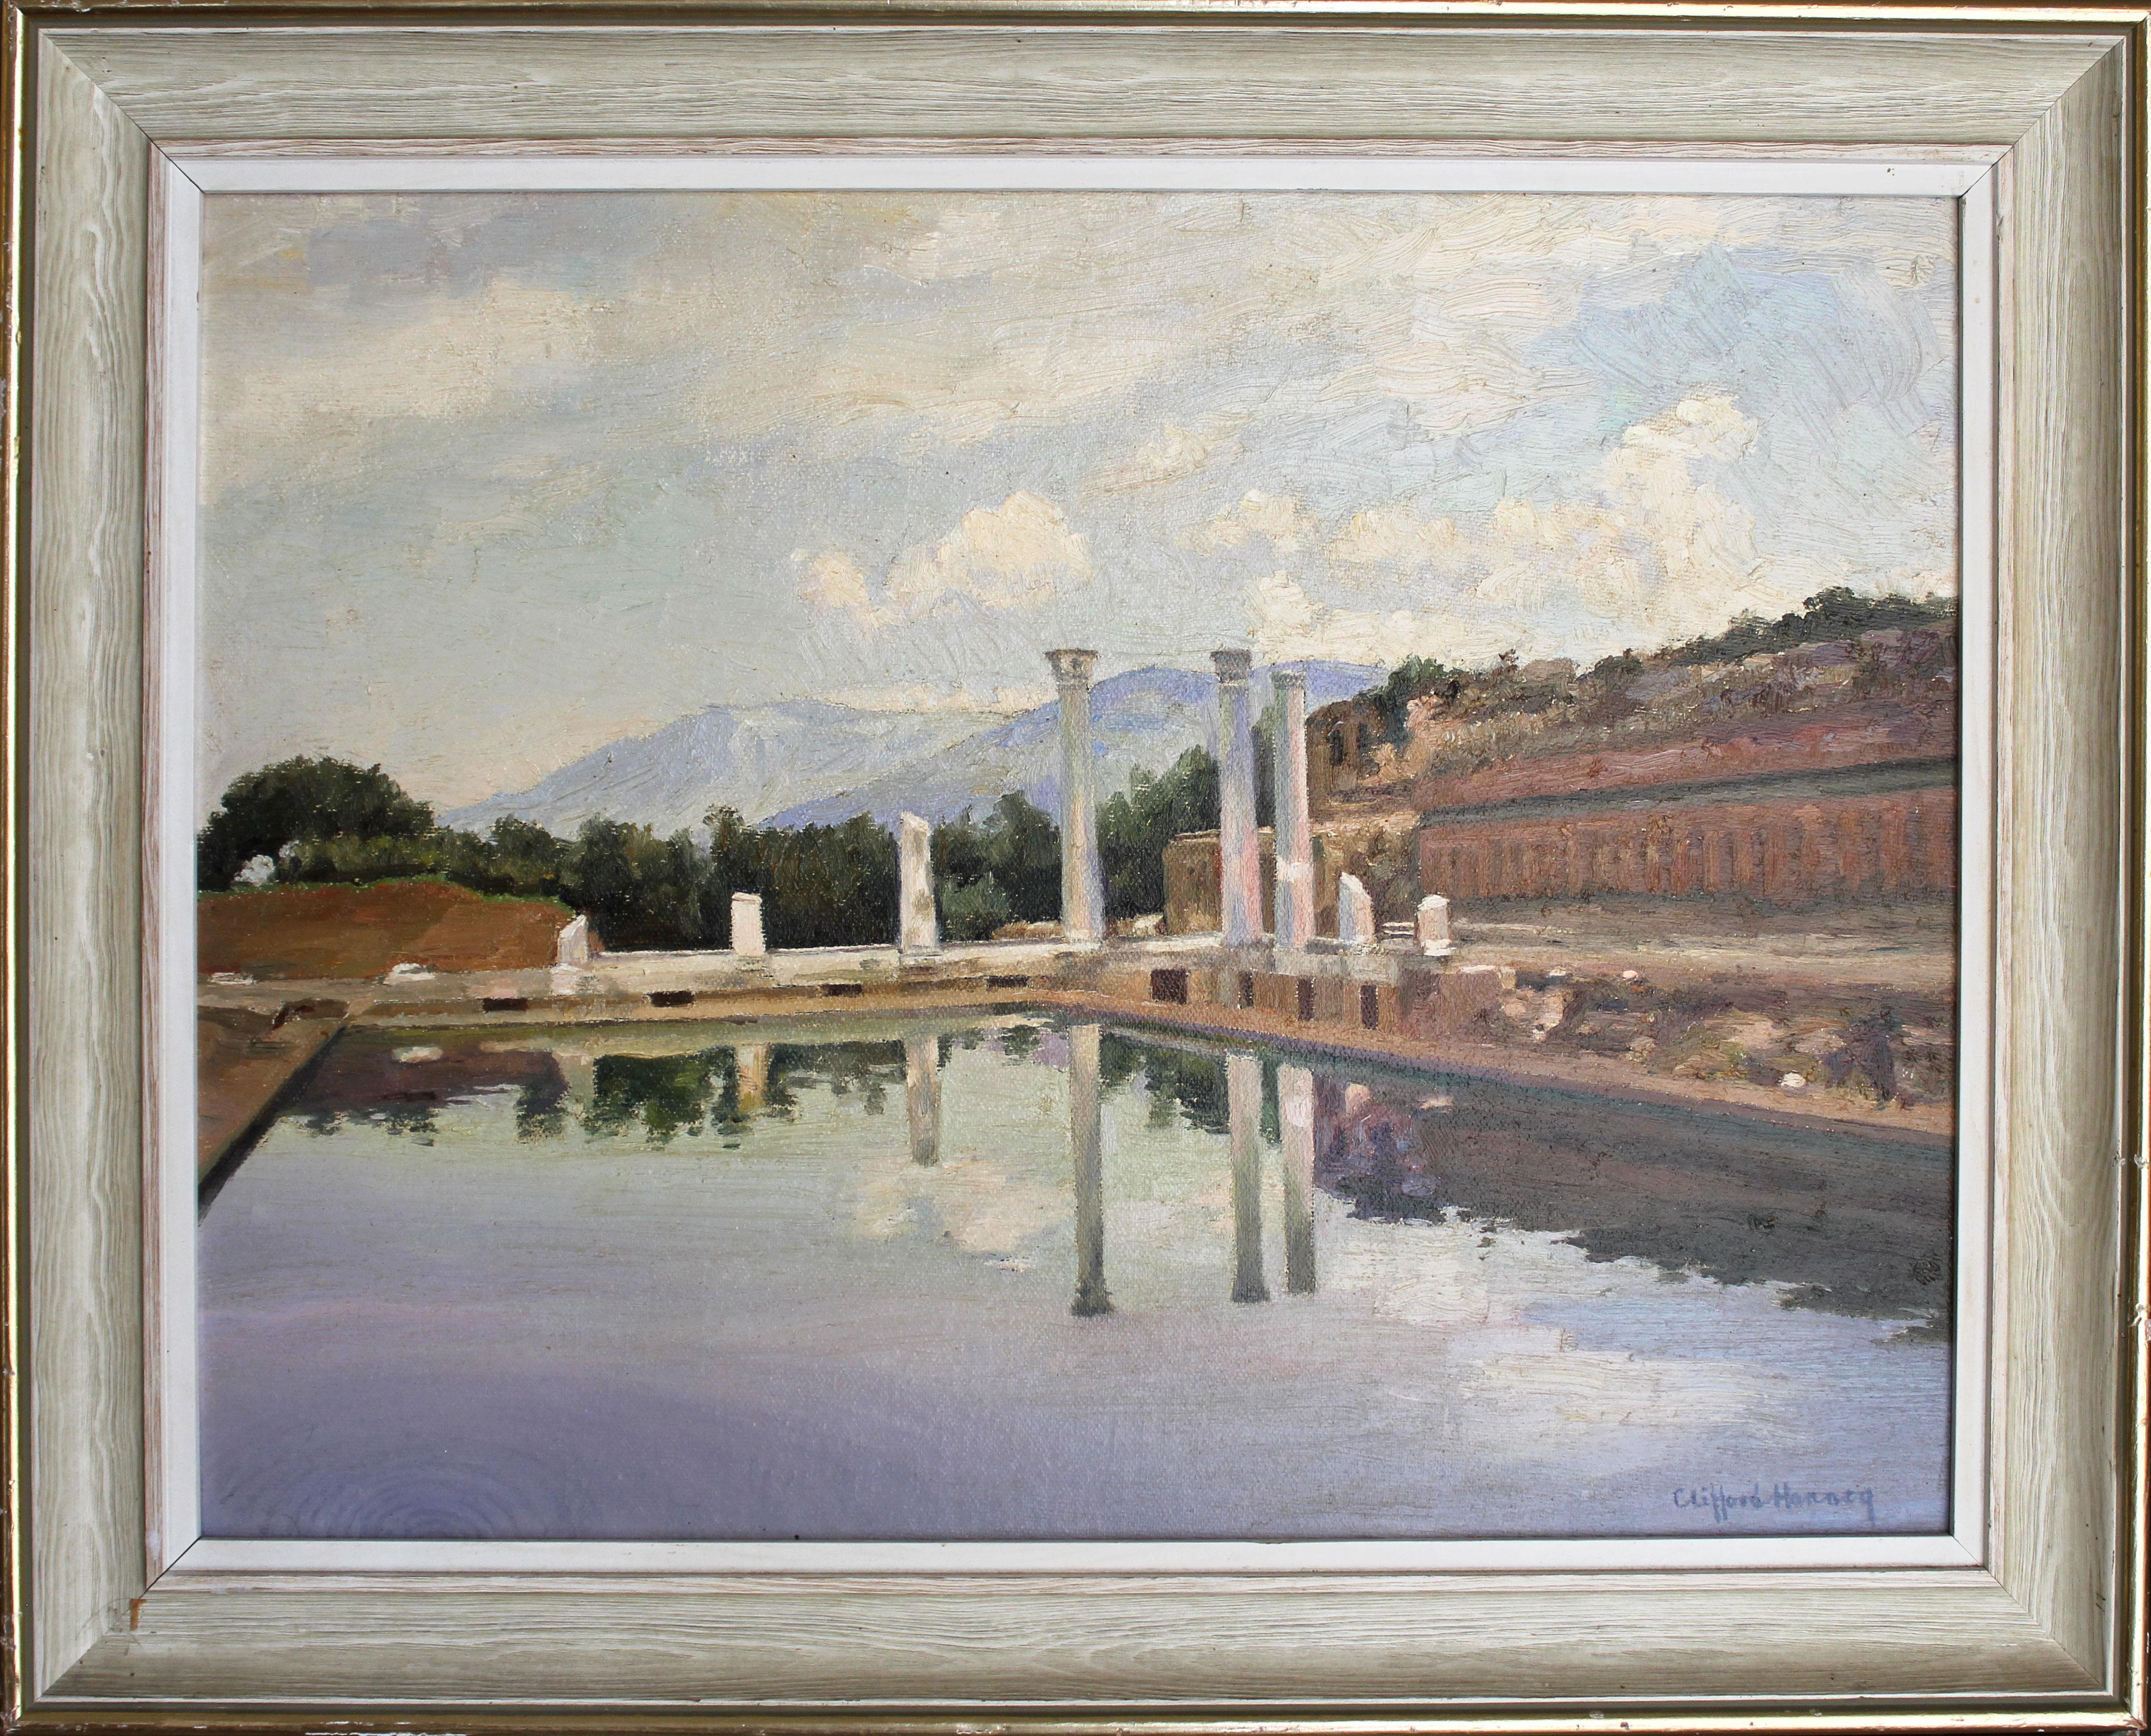 Hadrian's Villa - Painting by Clifford Hanney